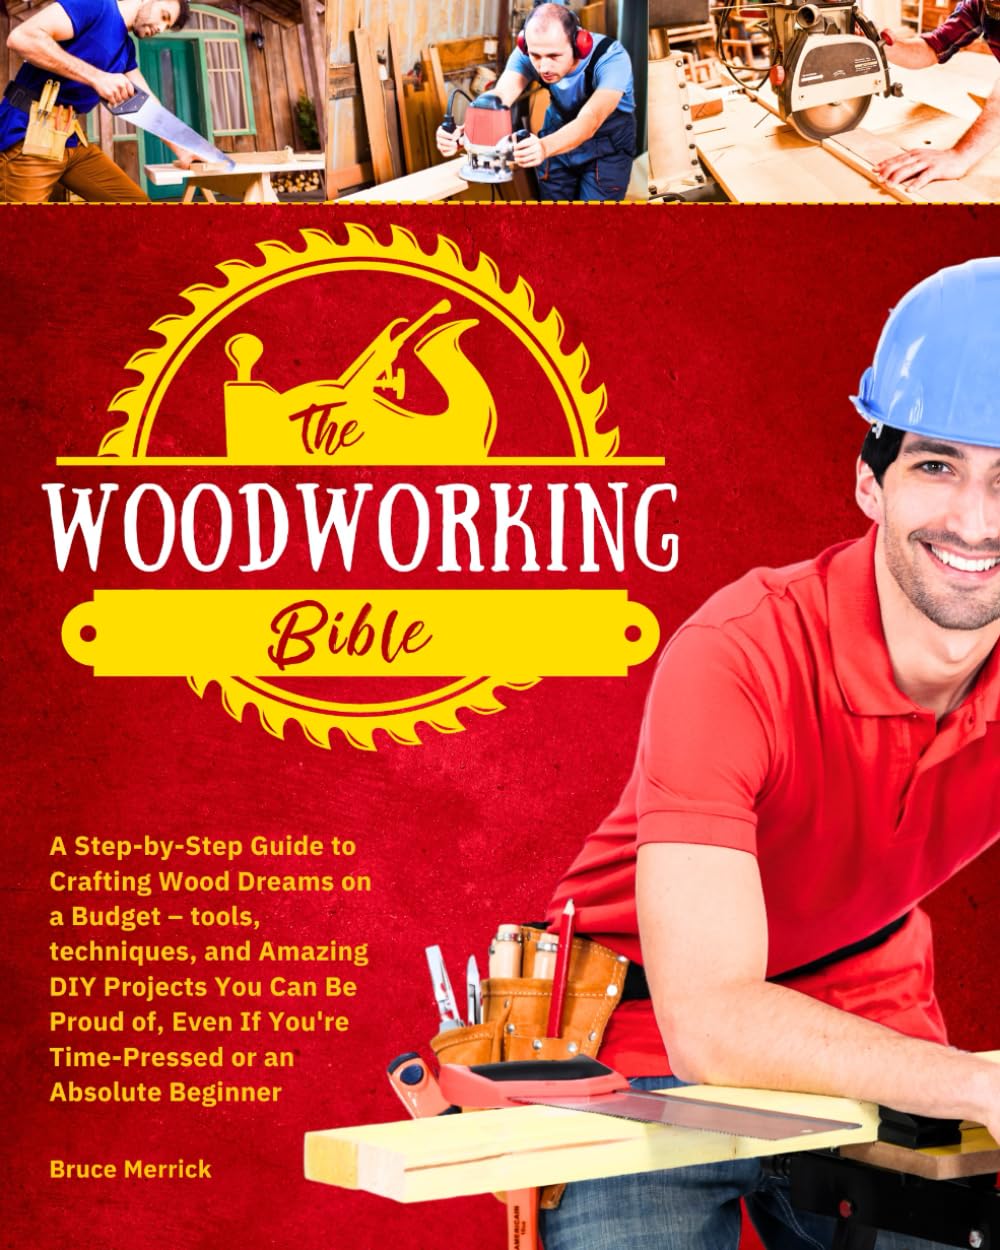 The Woodworking Bible: A Step-by-Step Guide to Crafting Wood Dreams on a Budget – Tools, Techniques, and Amazing DIY Projects You Can Be Proud of,